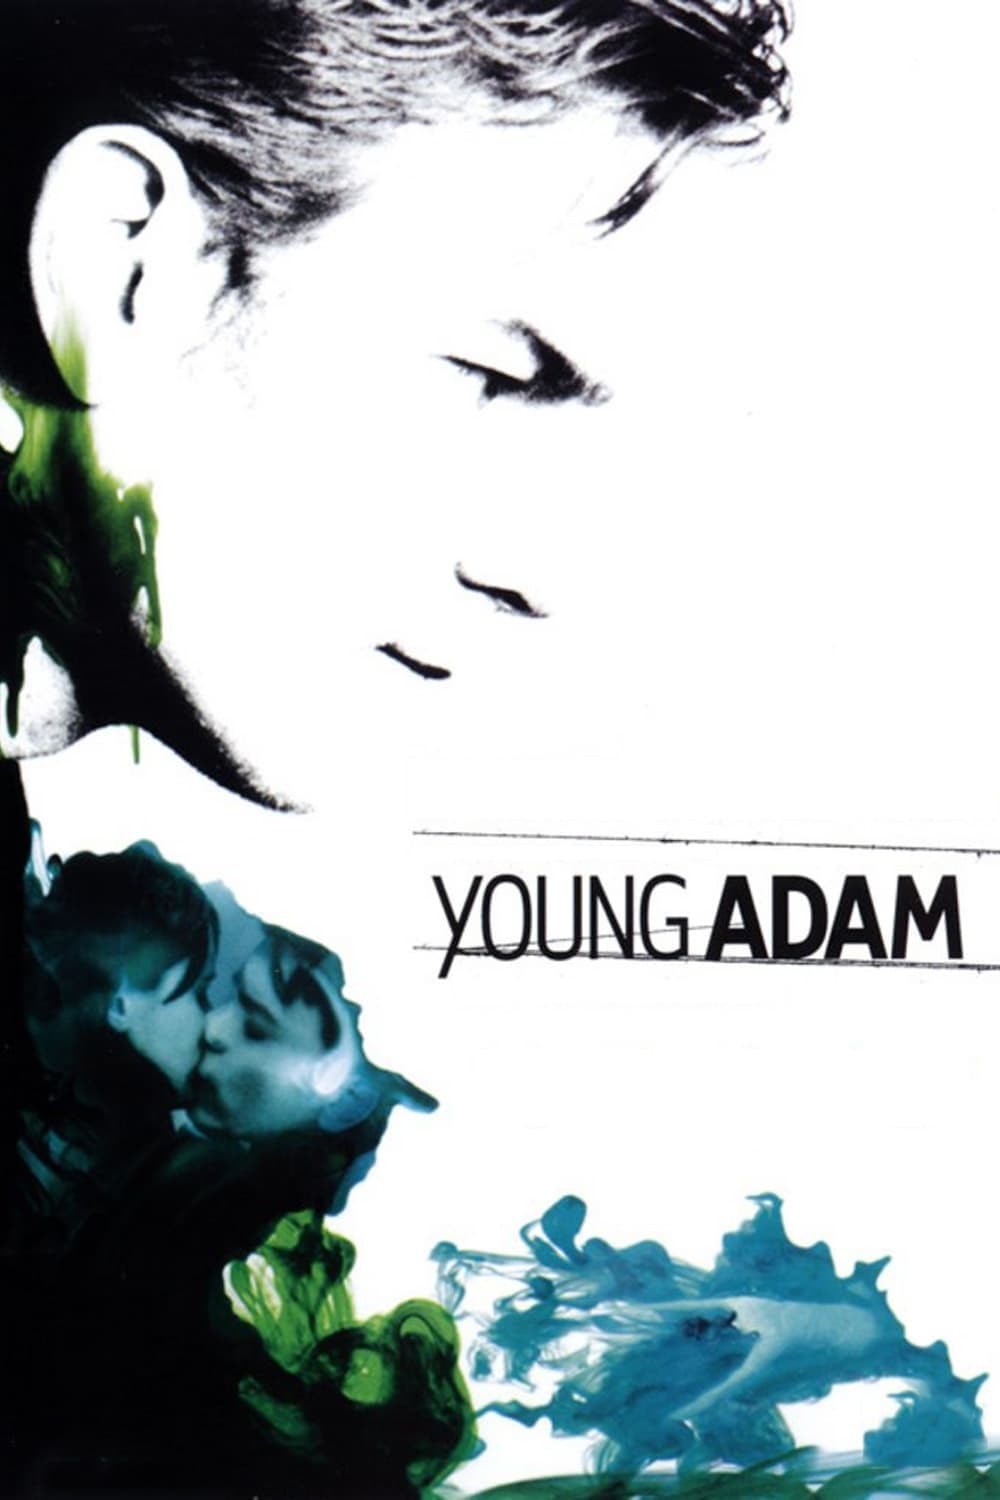 dominic son recommends young adams full movie pic